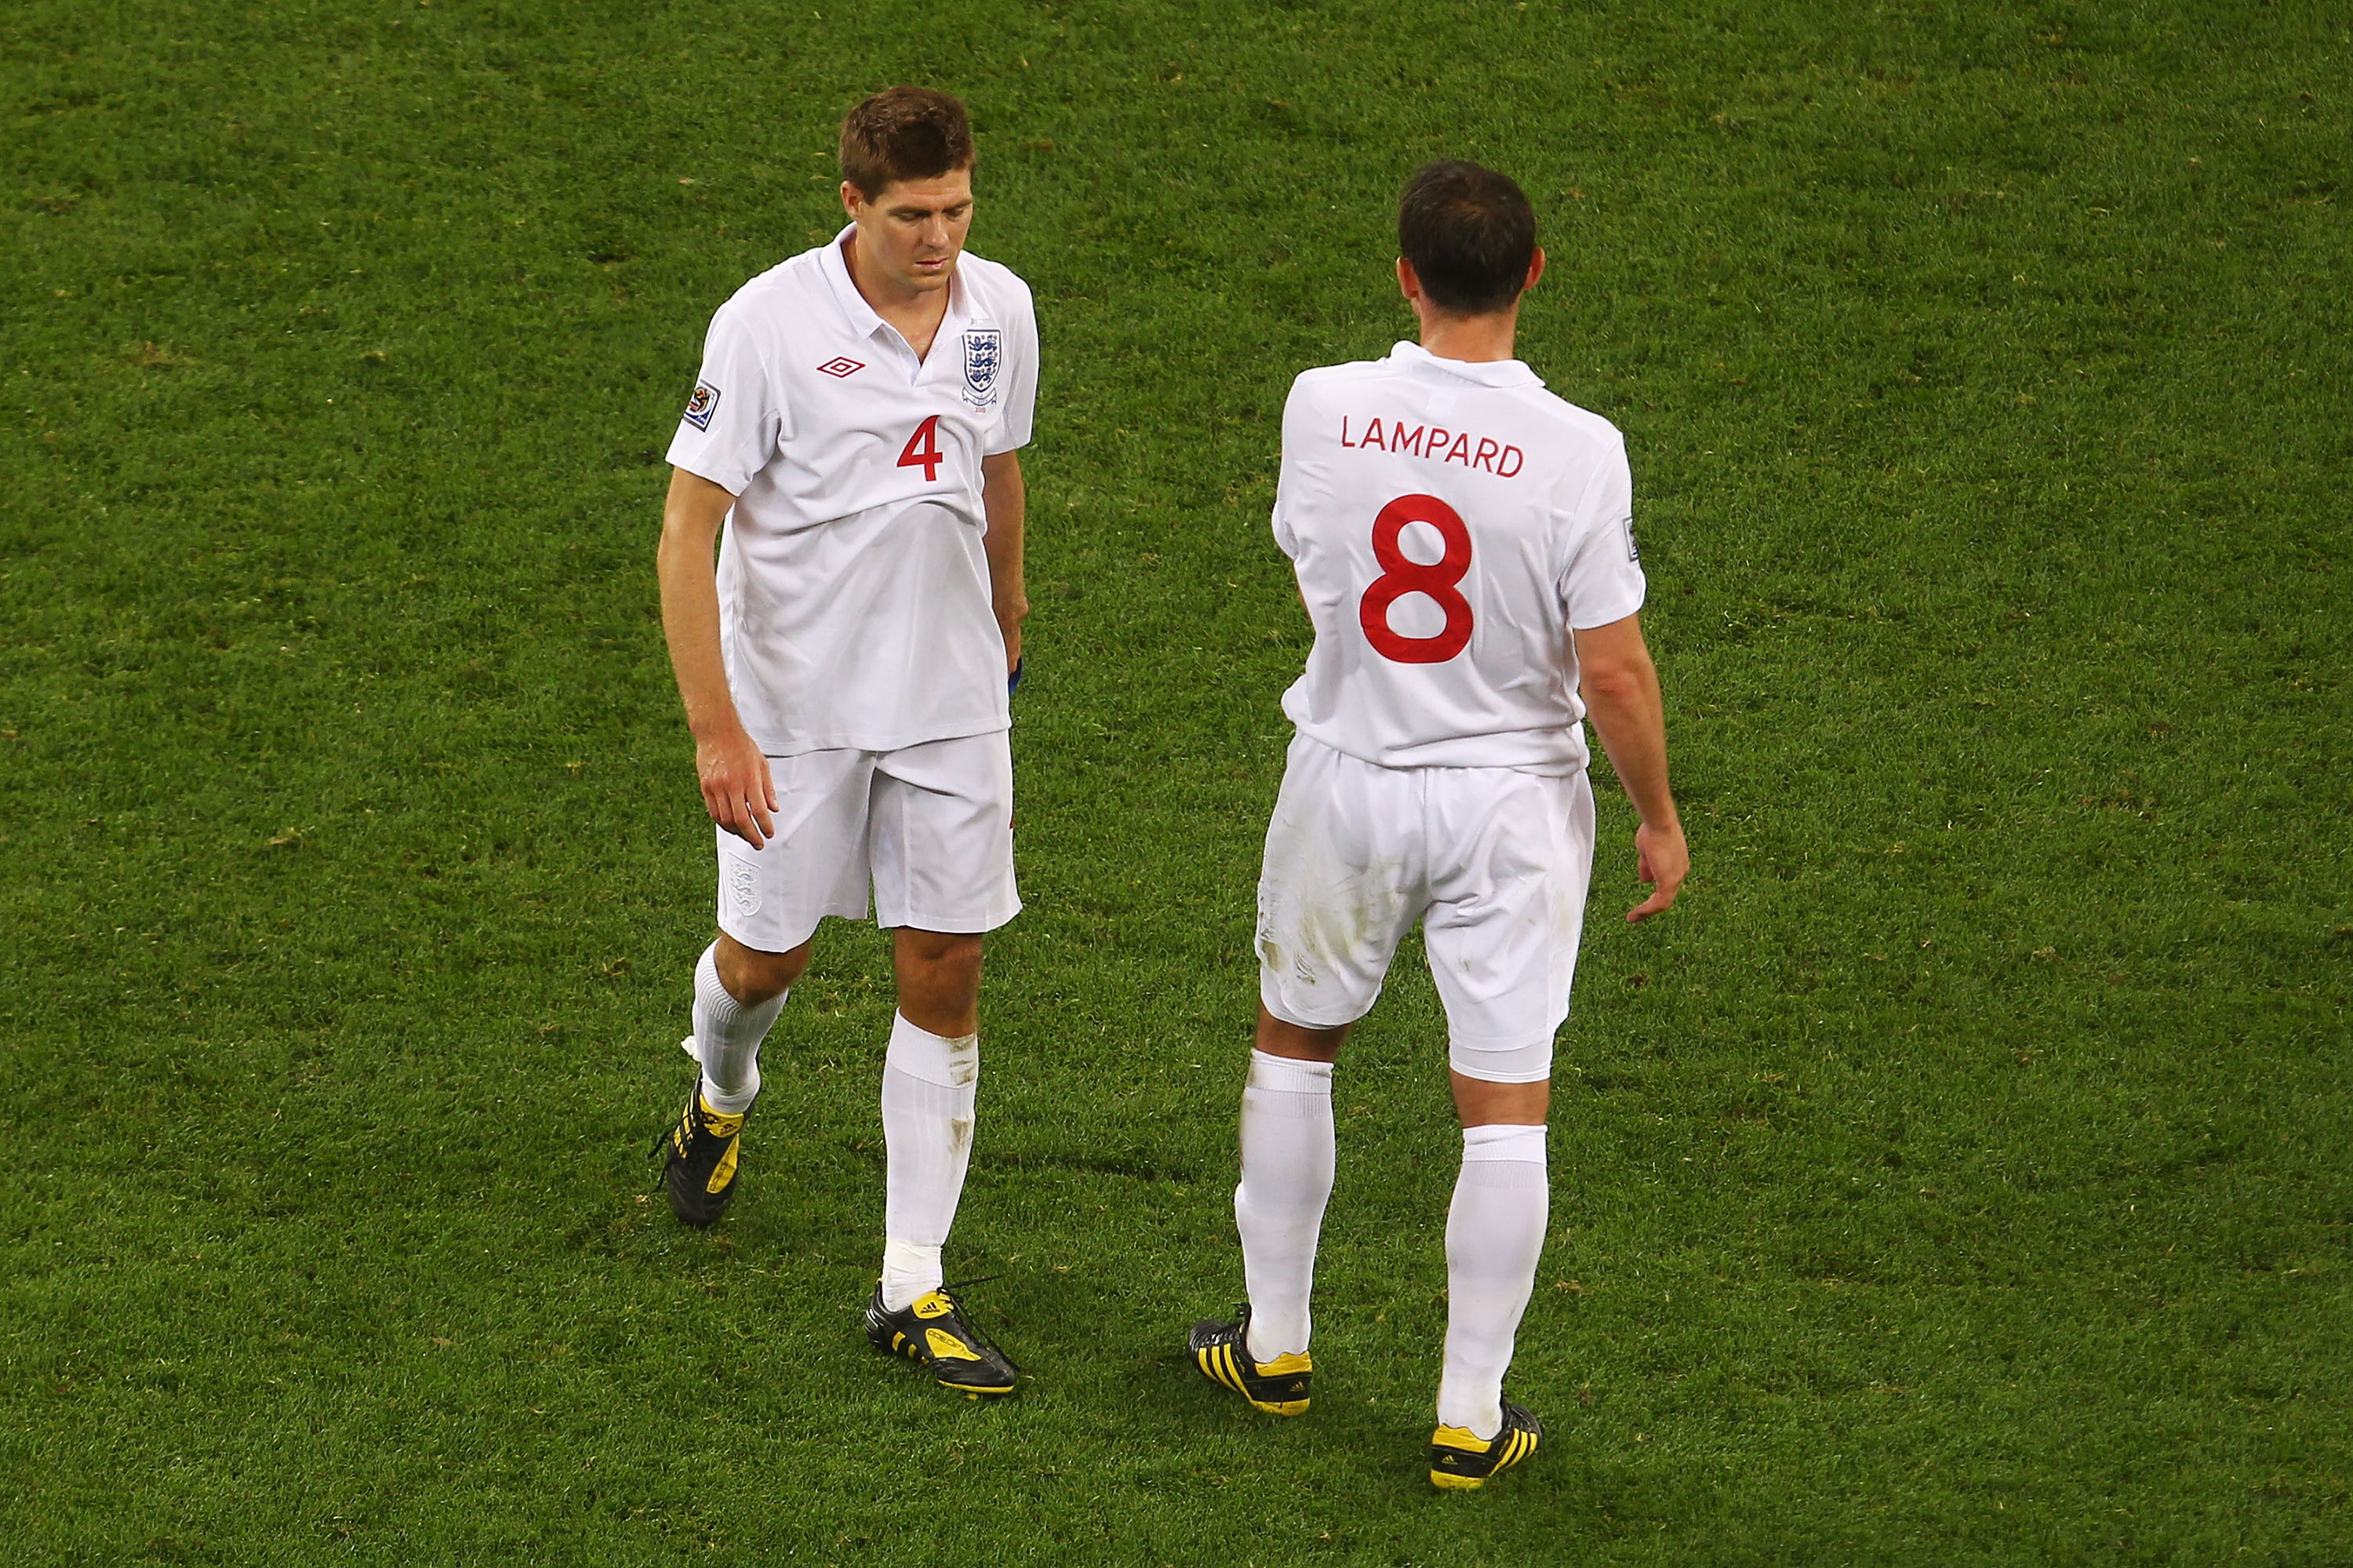 CAPE TOWN, SOUTH AFRICA - JUNE 18:  Captain Steven Gerrard and Frank Lampard of England look dejected during the 2010 FIFA World Cup South Africa Group C match between England and Algeria at Green Point Stadium on June 18, 2010 in Cape Town, South Africa.